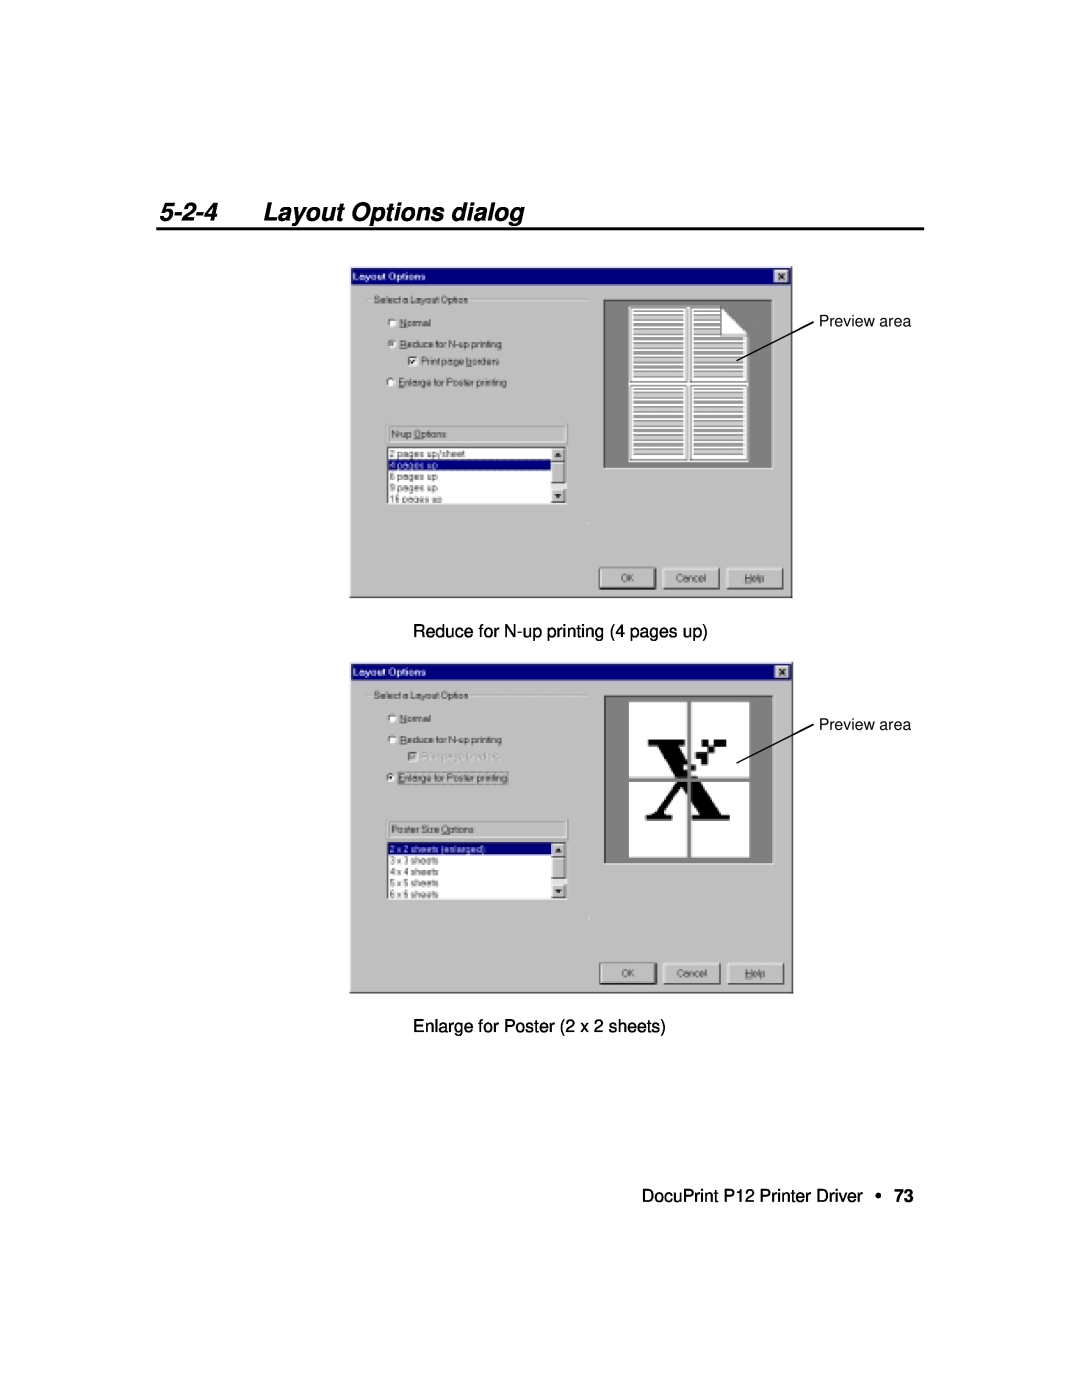 Xerox P12 manual Layout Options dialog, Reduce for N-up printing 4 pages up, Enlarge for Poster 2 x 2 sheets 